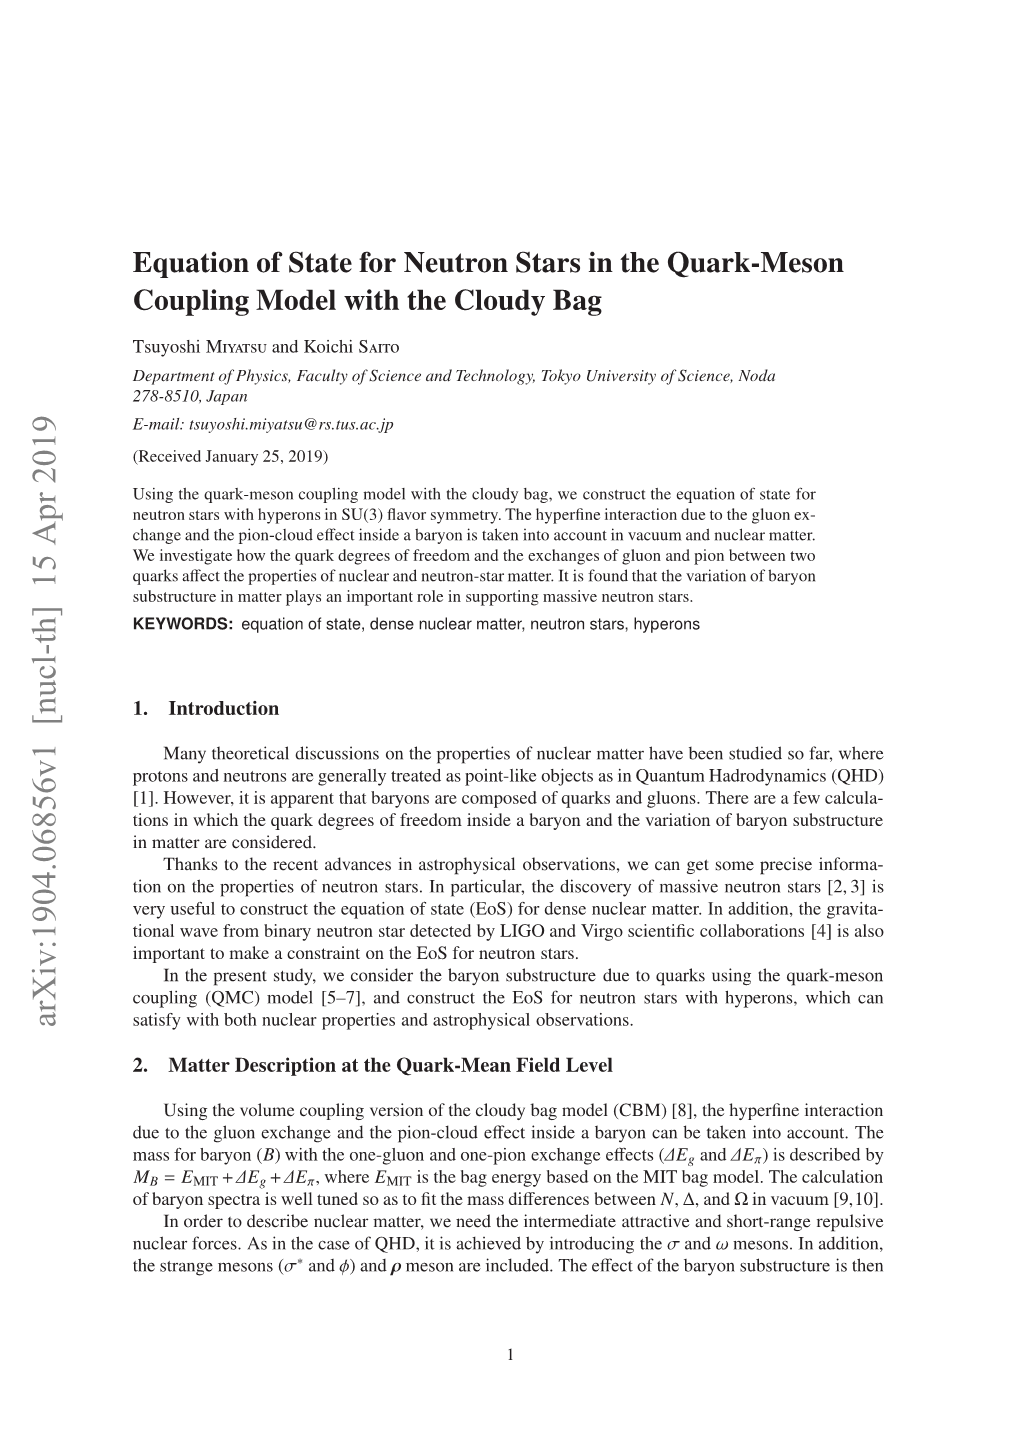 Equation of State for Neutron Stars in the Quark-Meson Coupling Model